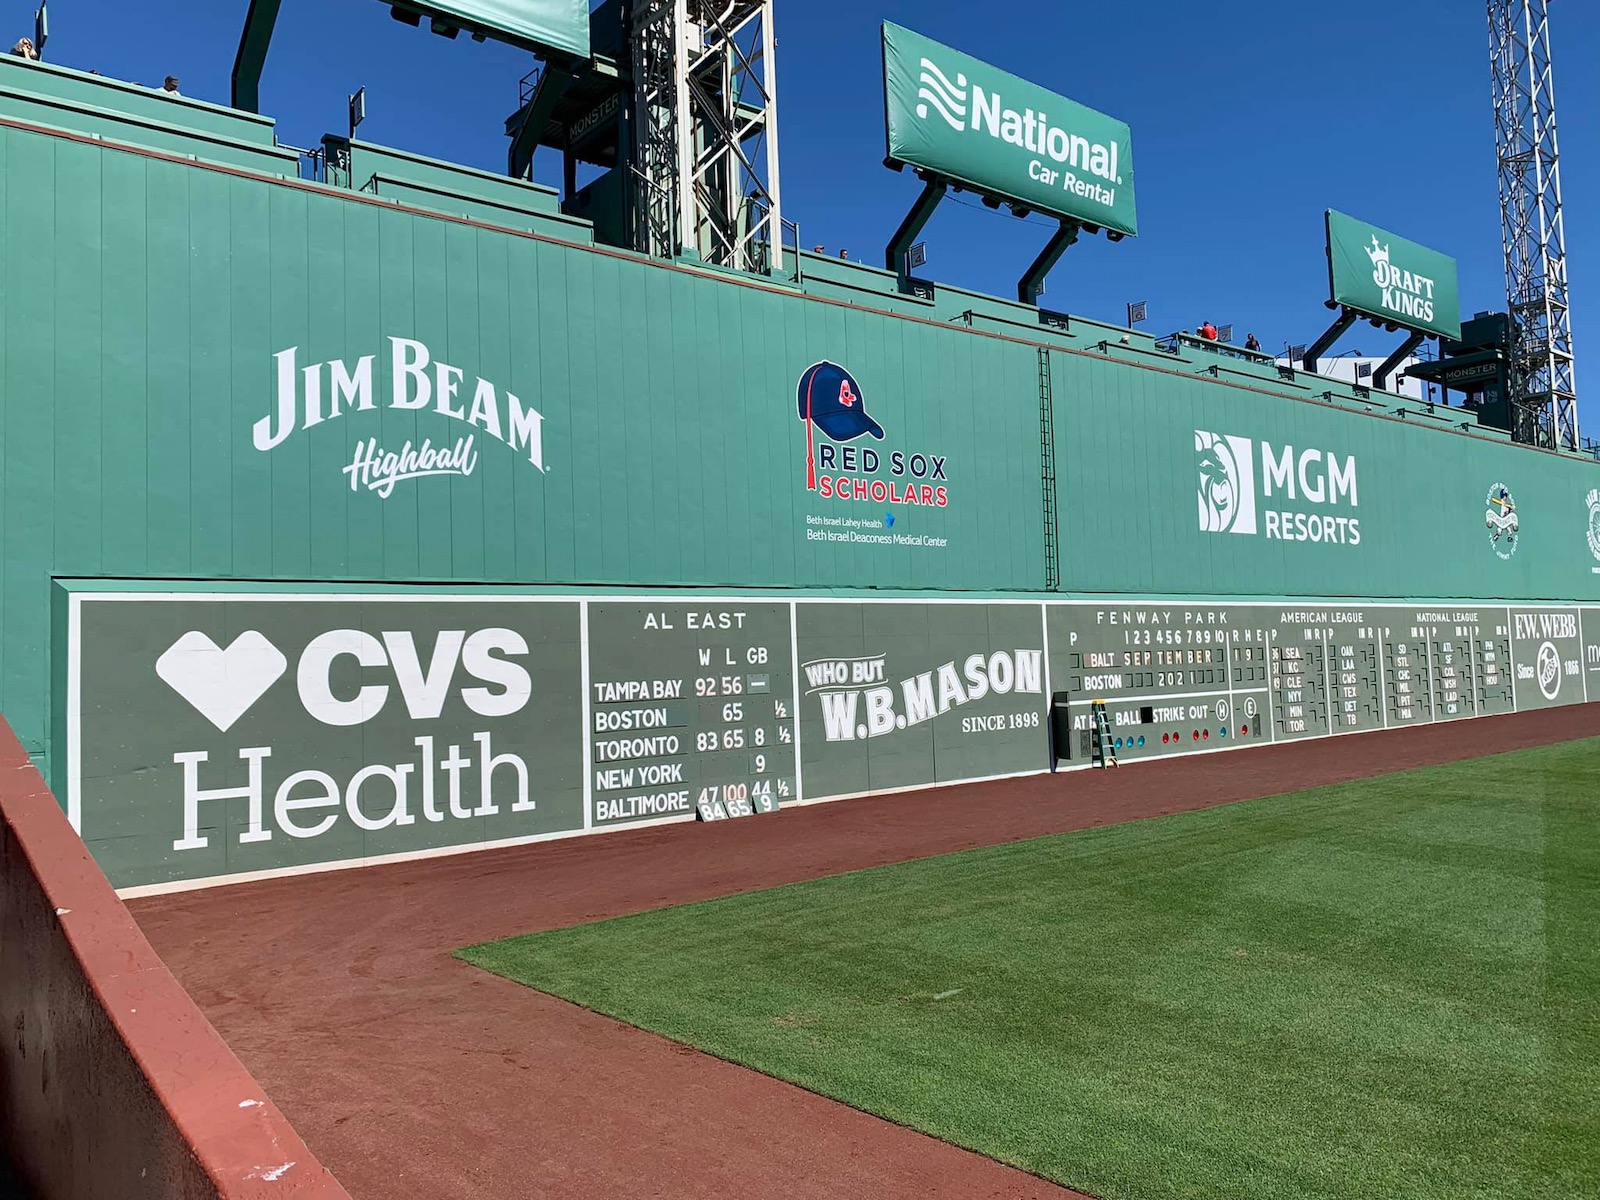 Red Sox expand Fenway Park adding two new bleacher sections